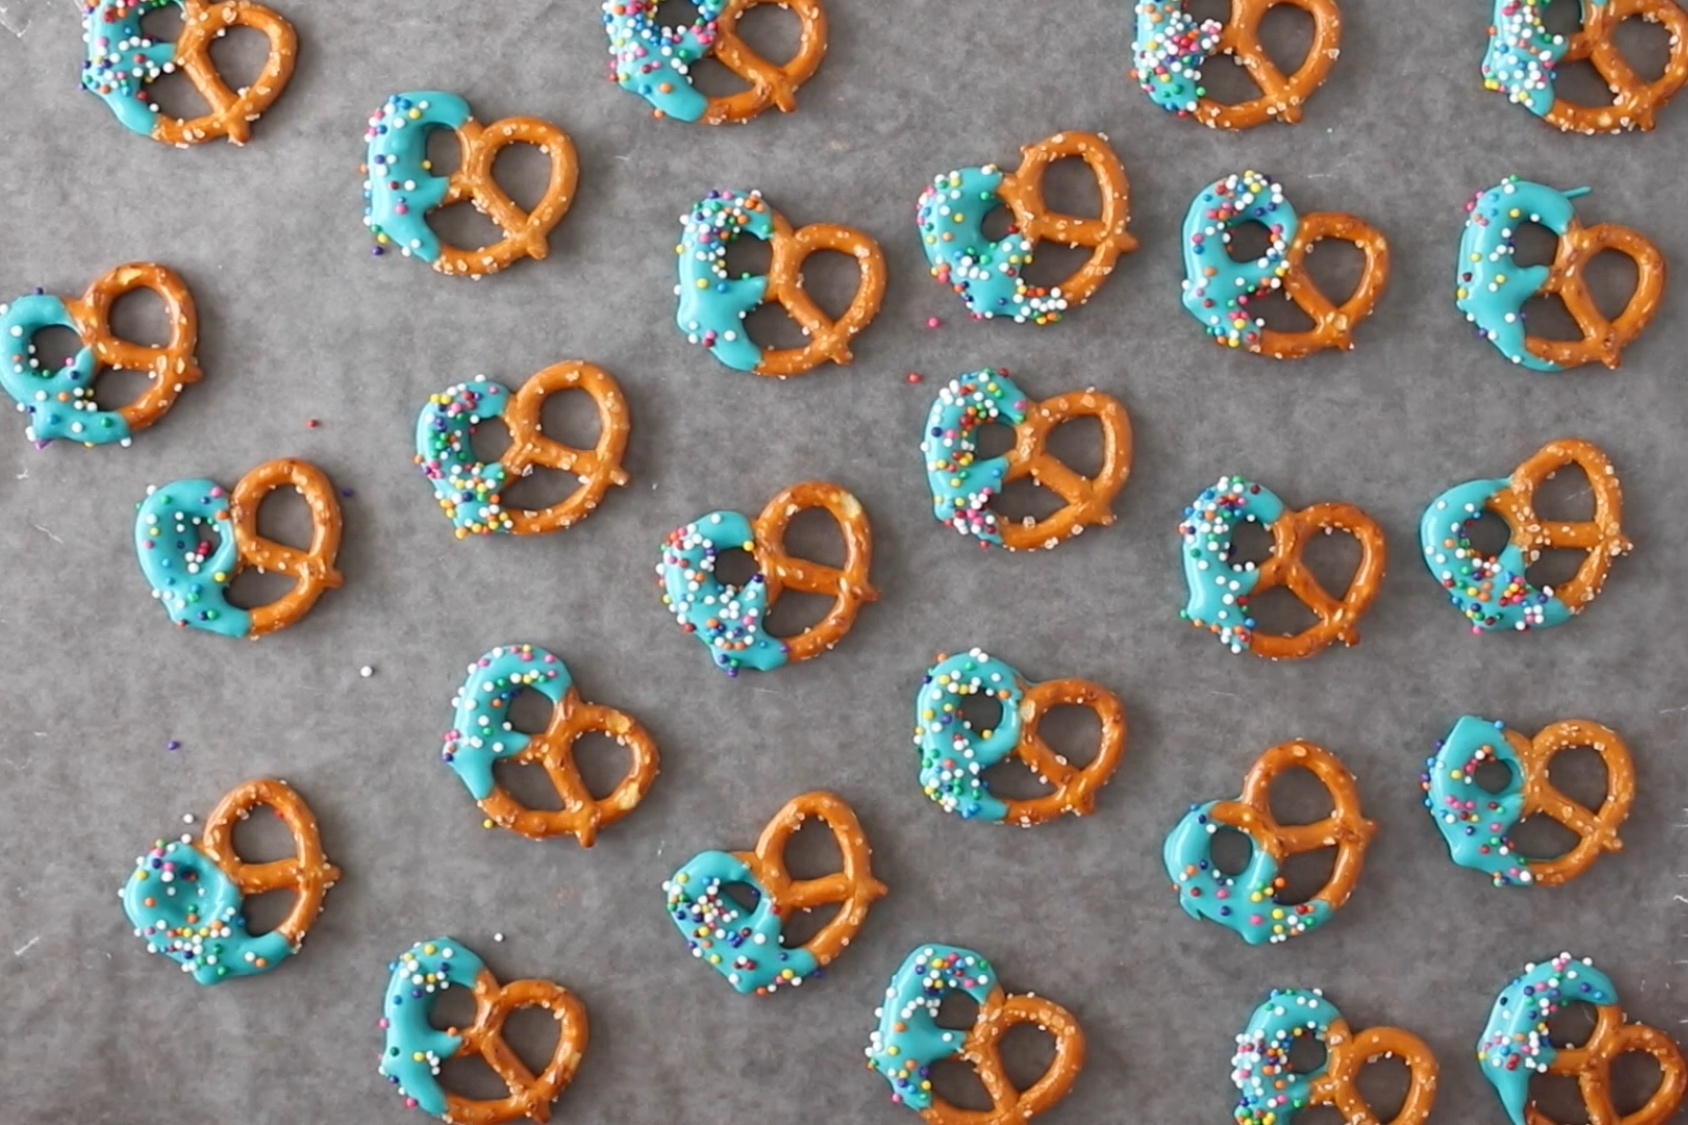 pretzels dipped in candy melts for a party favor idea